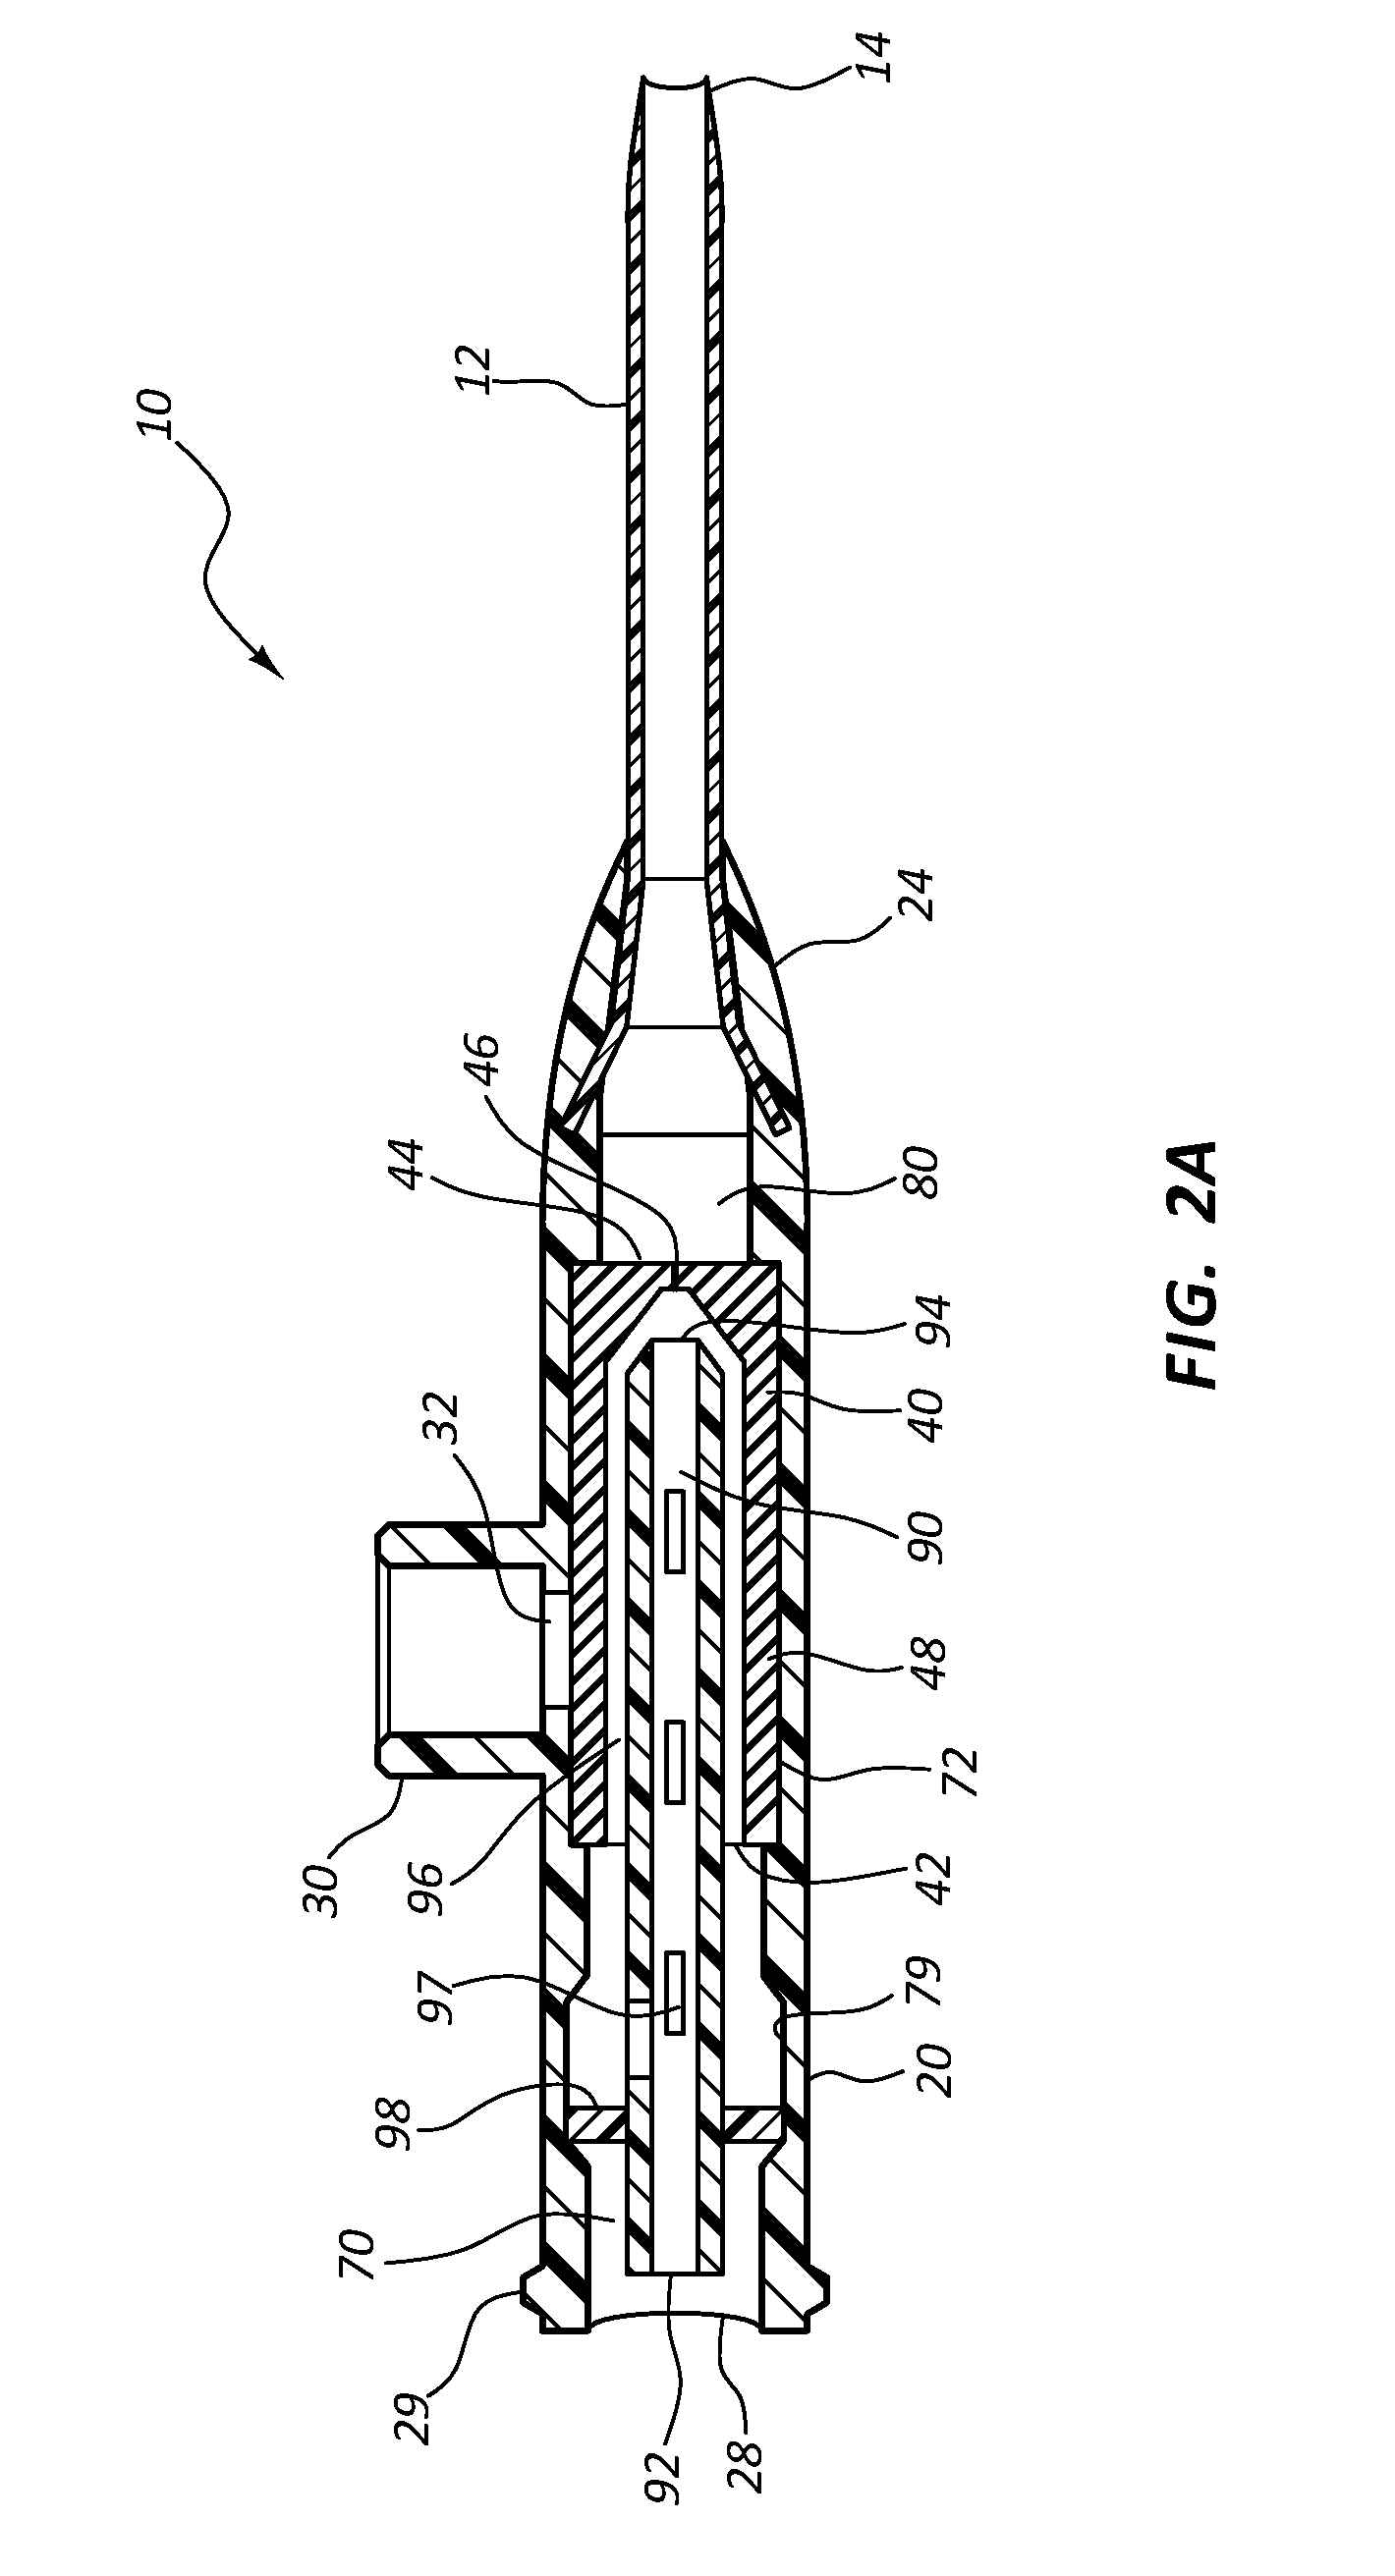 Ported catheter adapter having combined port and blood control valve with venting